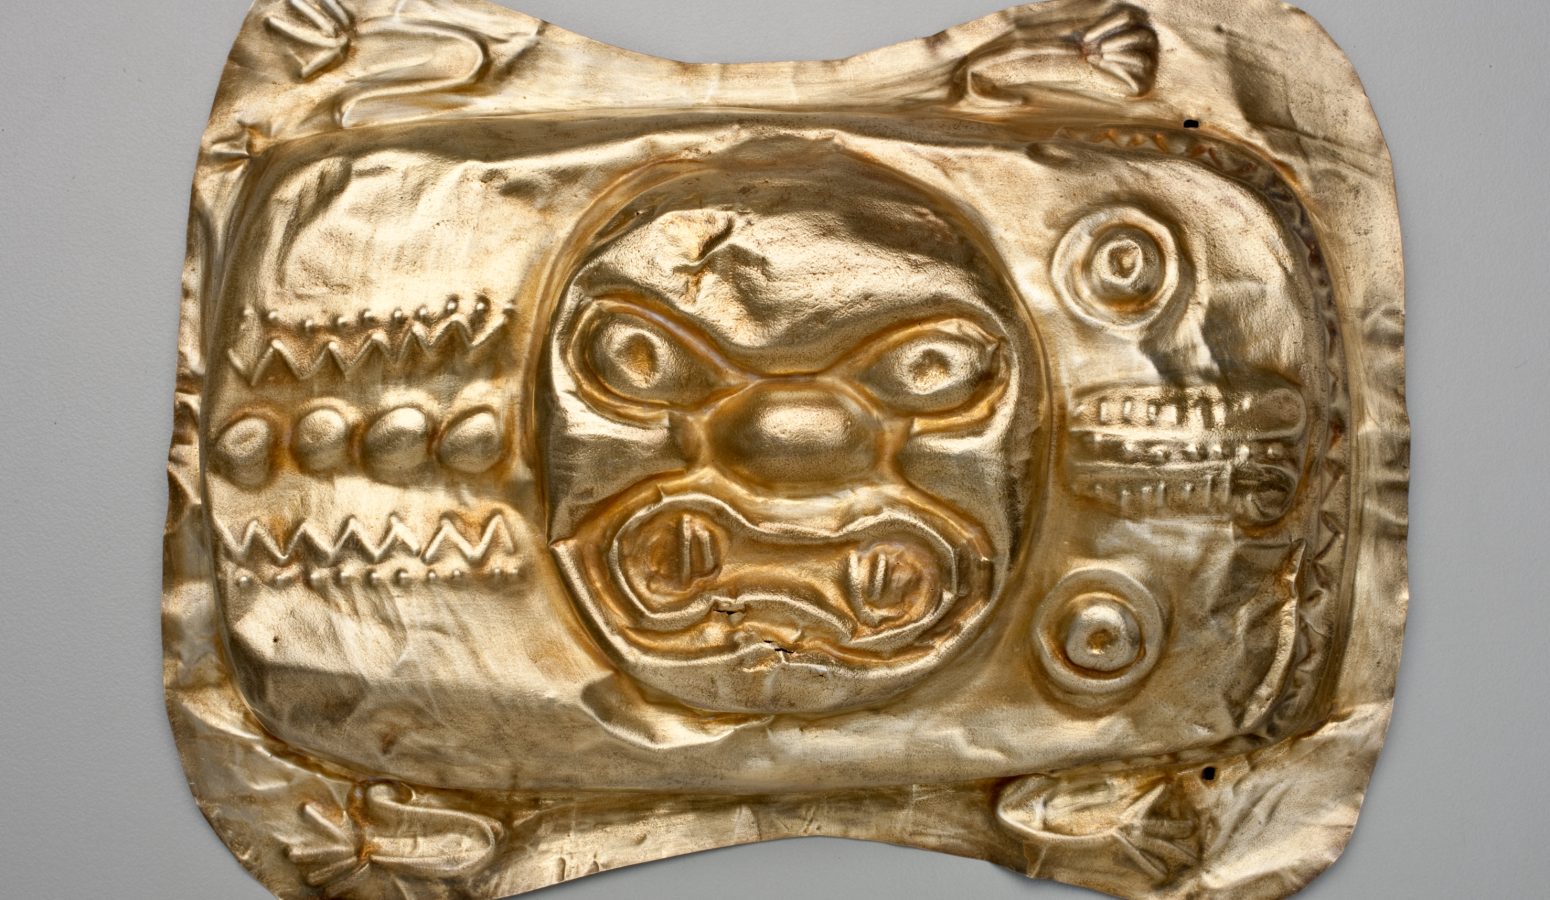 A gold metal object with embossed designs around a snarling animal face